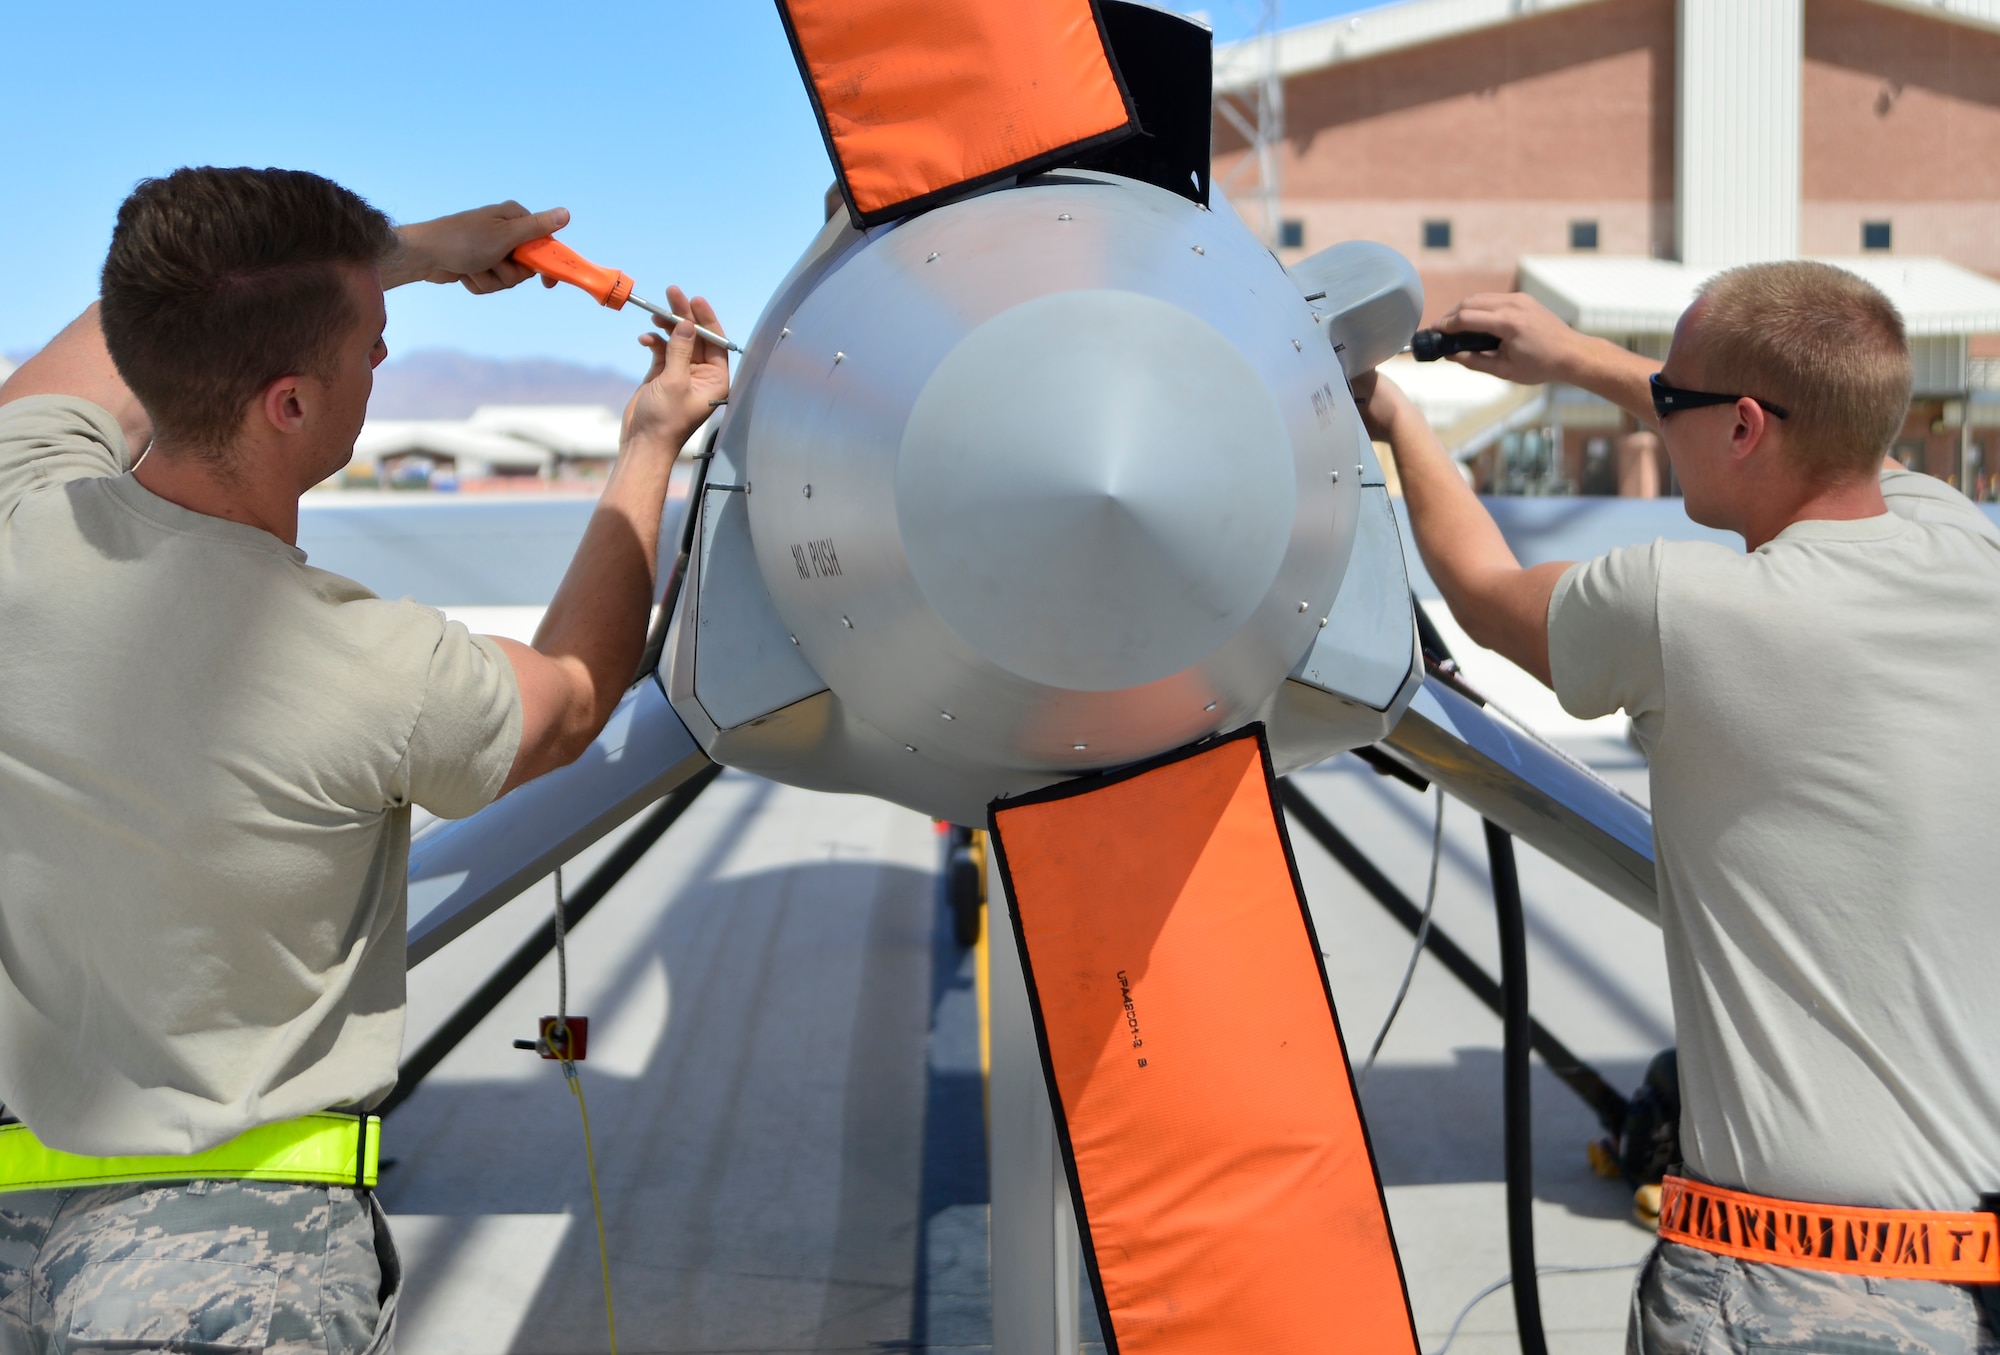 Staff Sgt. Ken, left, and Senior Airman Jonathan, right, both 432nd Aircraft Maintenance Squadron MQ-1 Predator crew chiefs, take off an engine panel during a post-flight check April 5, 2015 at Creech Air Force Base, Nevada. Crew chiefs are responsible for supervising, monitoring, and directing aircraft maintenance. (U.S. Air Force photo by Senior Airman Christian Clausen/Released)